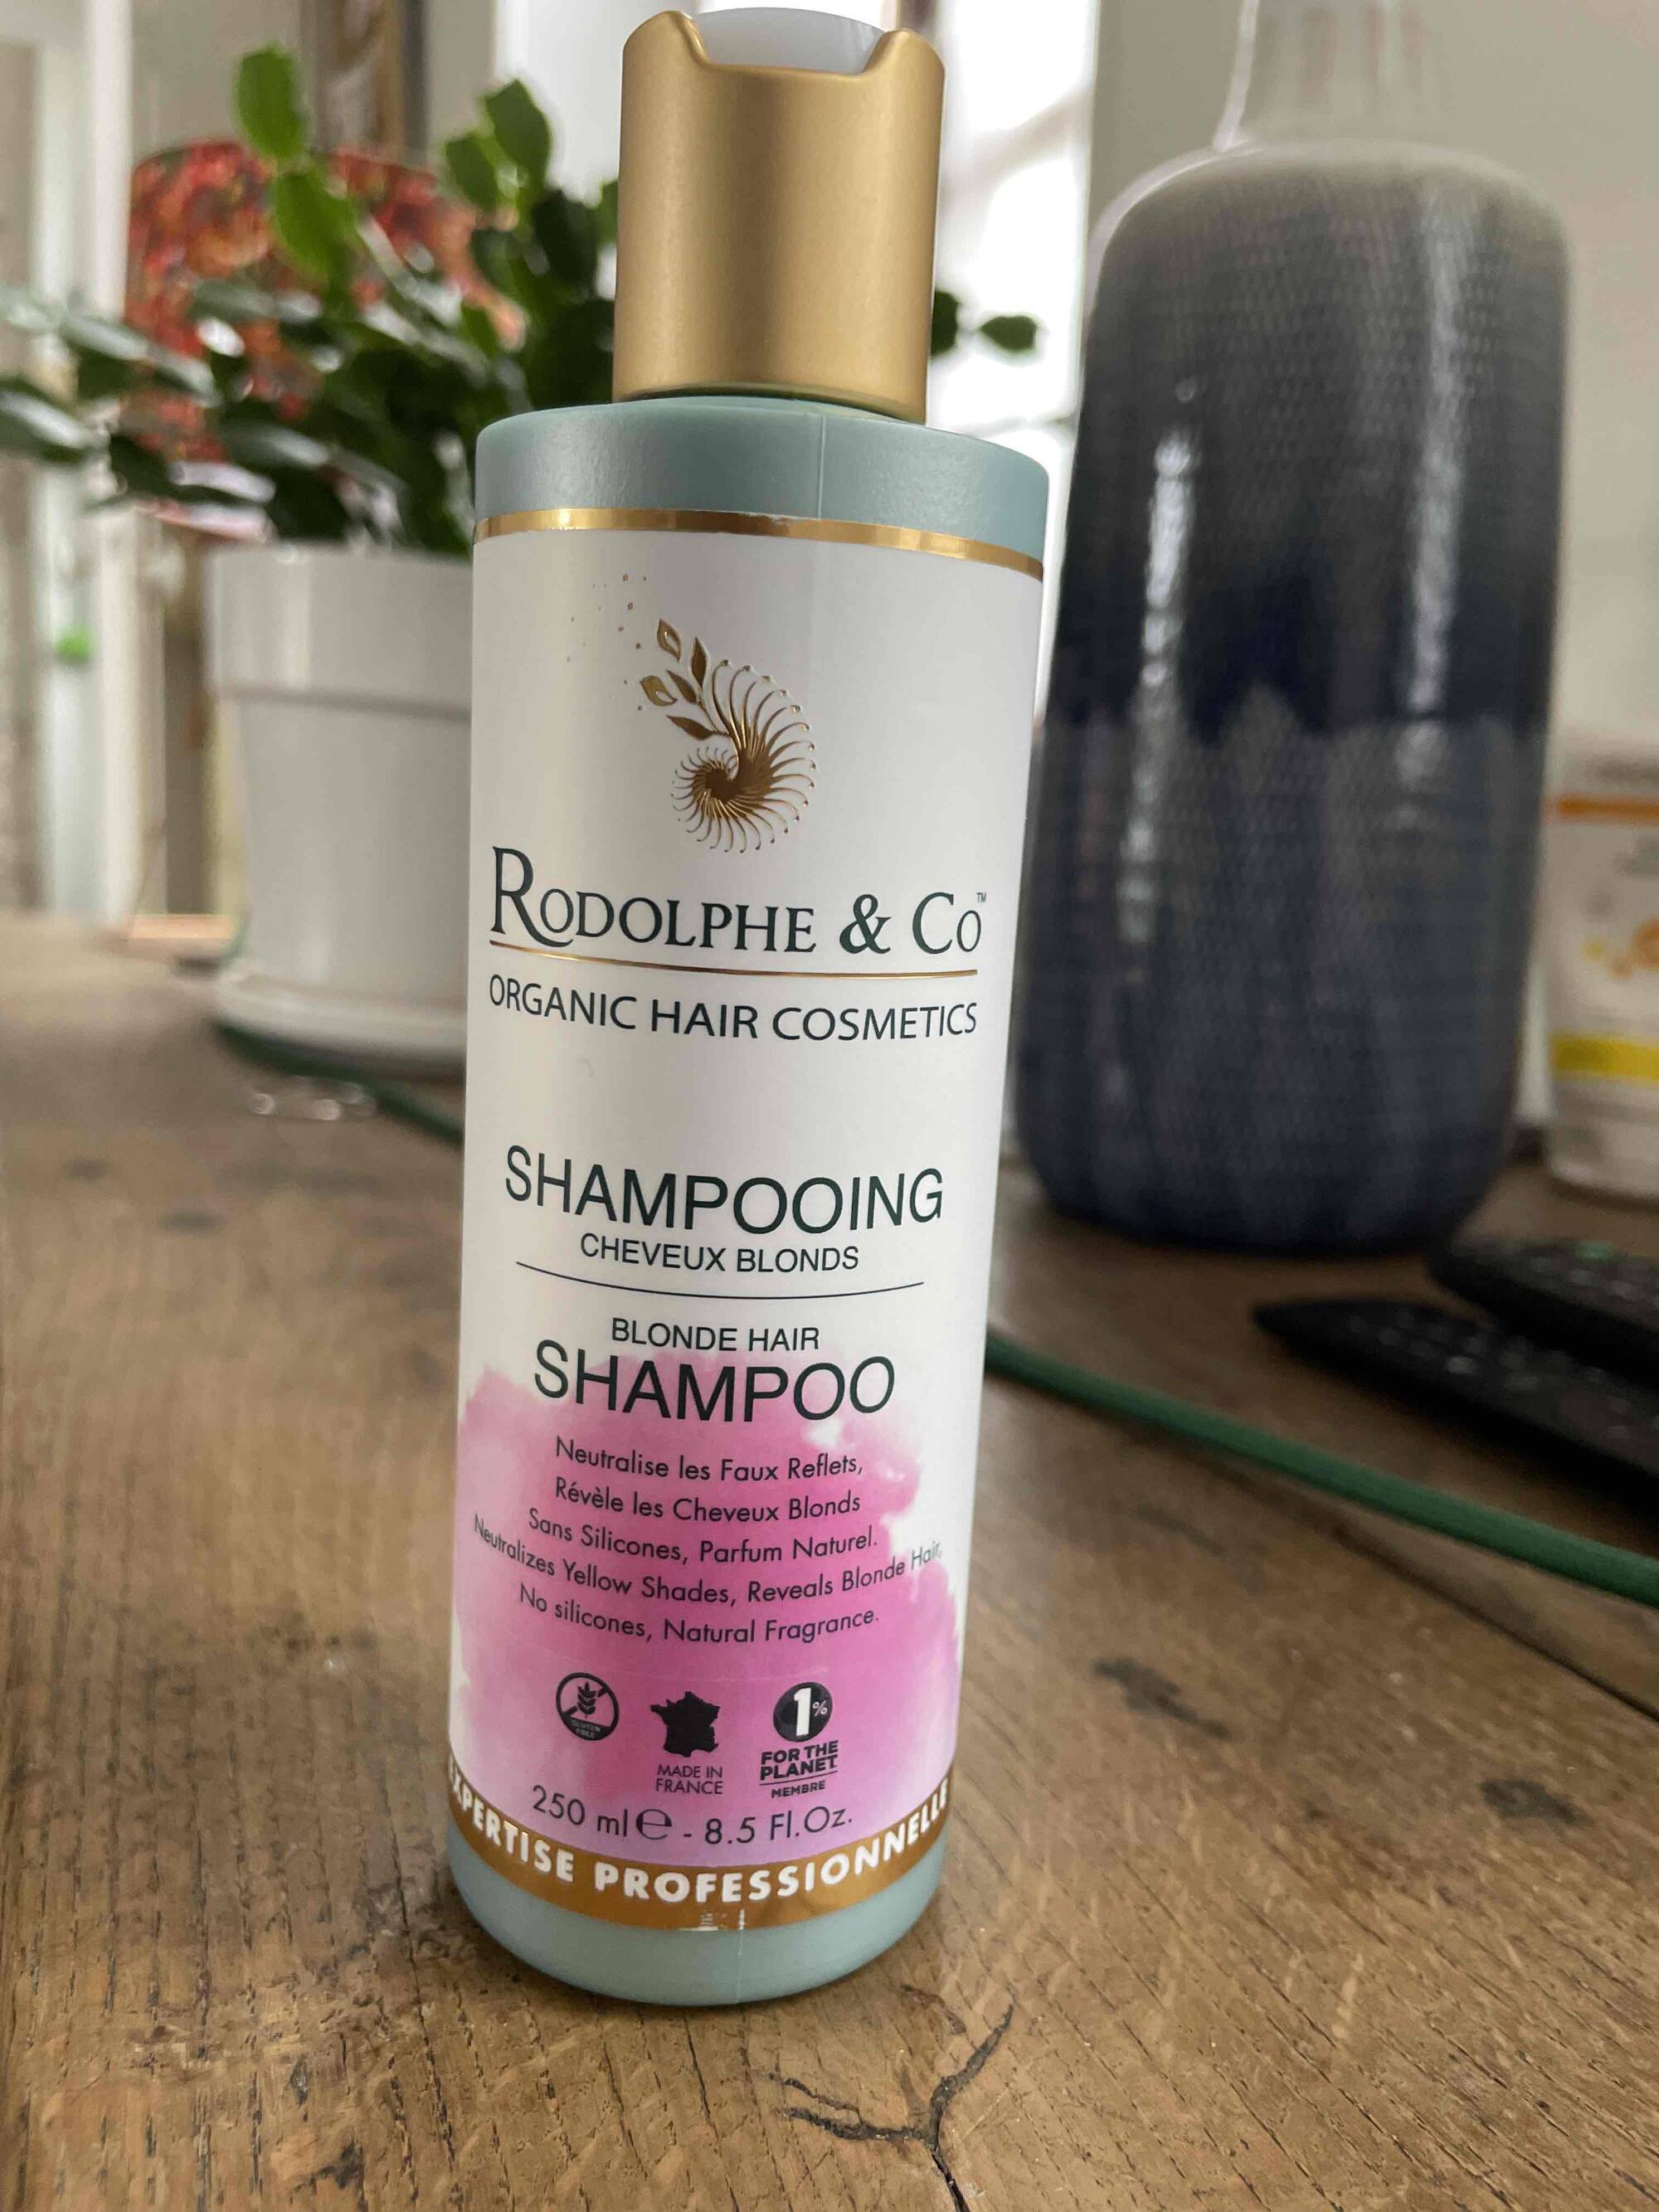 RODOLPHE & CO - Shampooing cheveux blonds